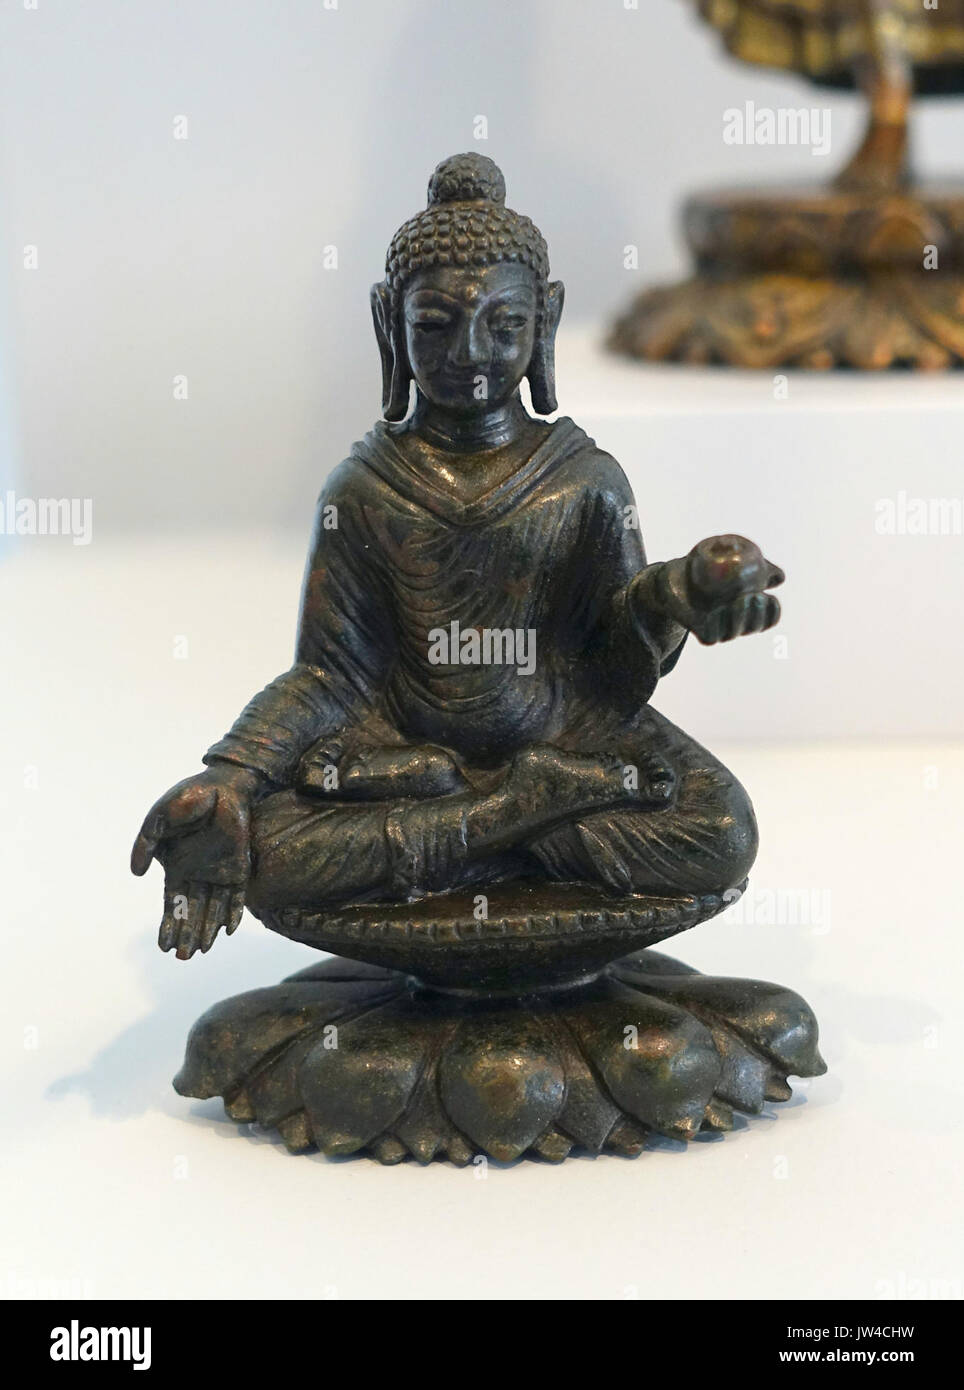 Seated Buddha with Left Hand Holding a Covered Jar, Late Gandharan style, Pakistan, Swat Valley, Swat District, Khyber Pakhtunkhwa, 9th cent , bronze   Arthur M  Sackler Museum, Harvard University   DSC00843 Stock Photo